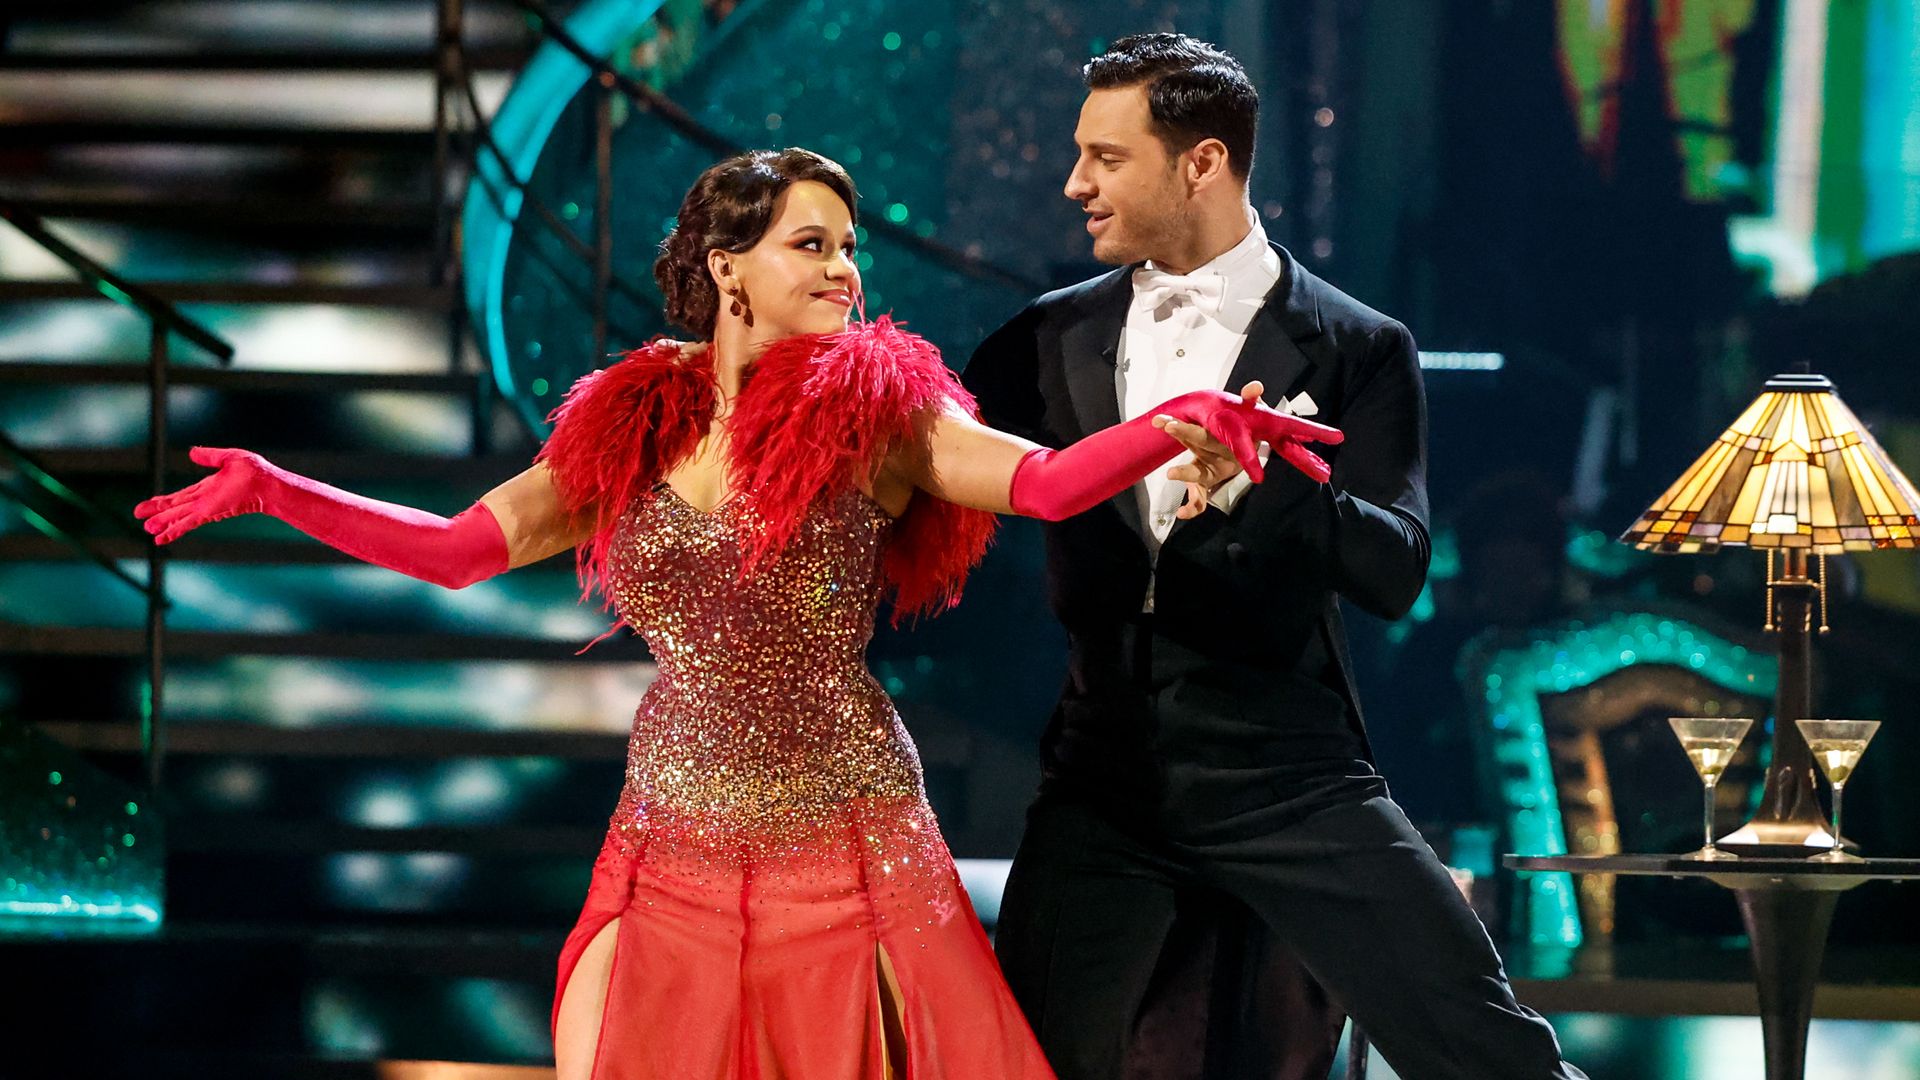 Ellie Leach and Vito Coppola on Strictly Come Dancing